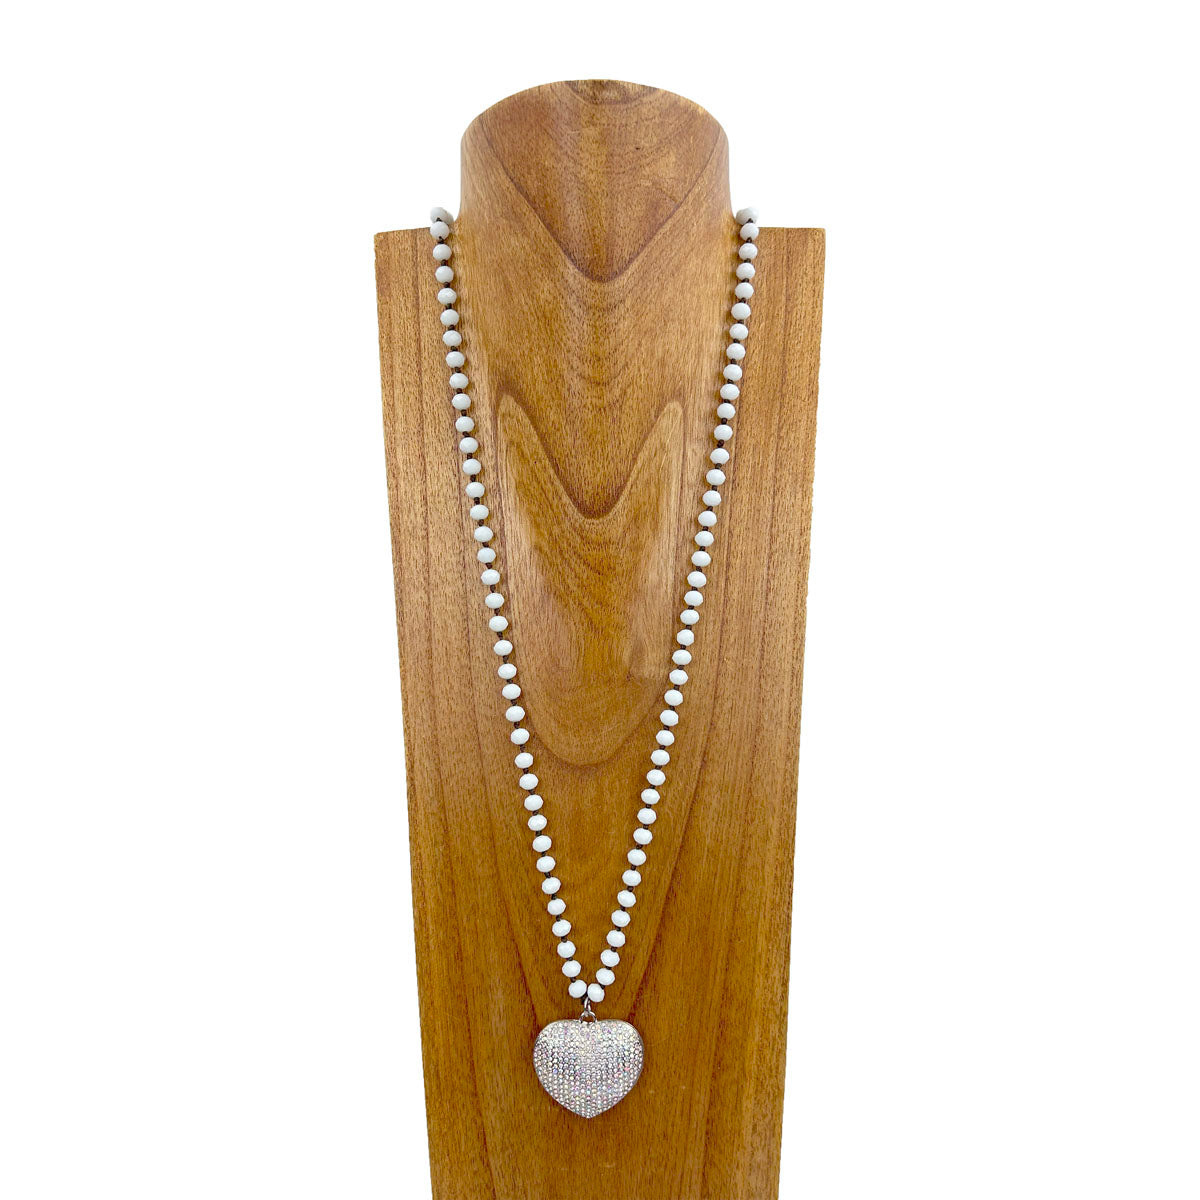 NKZ231223-13           32 inches white crystal beads string with silver metal heart pendent Necklace